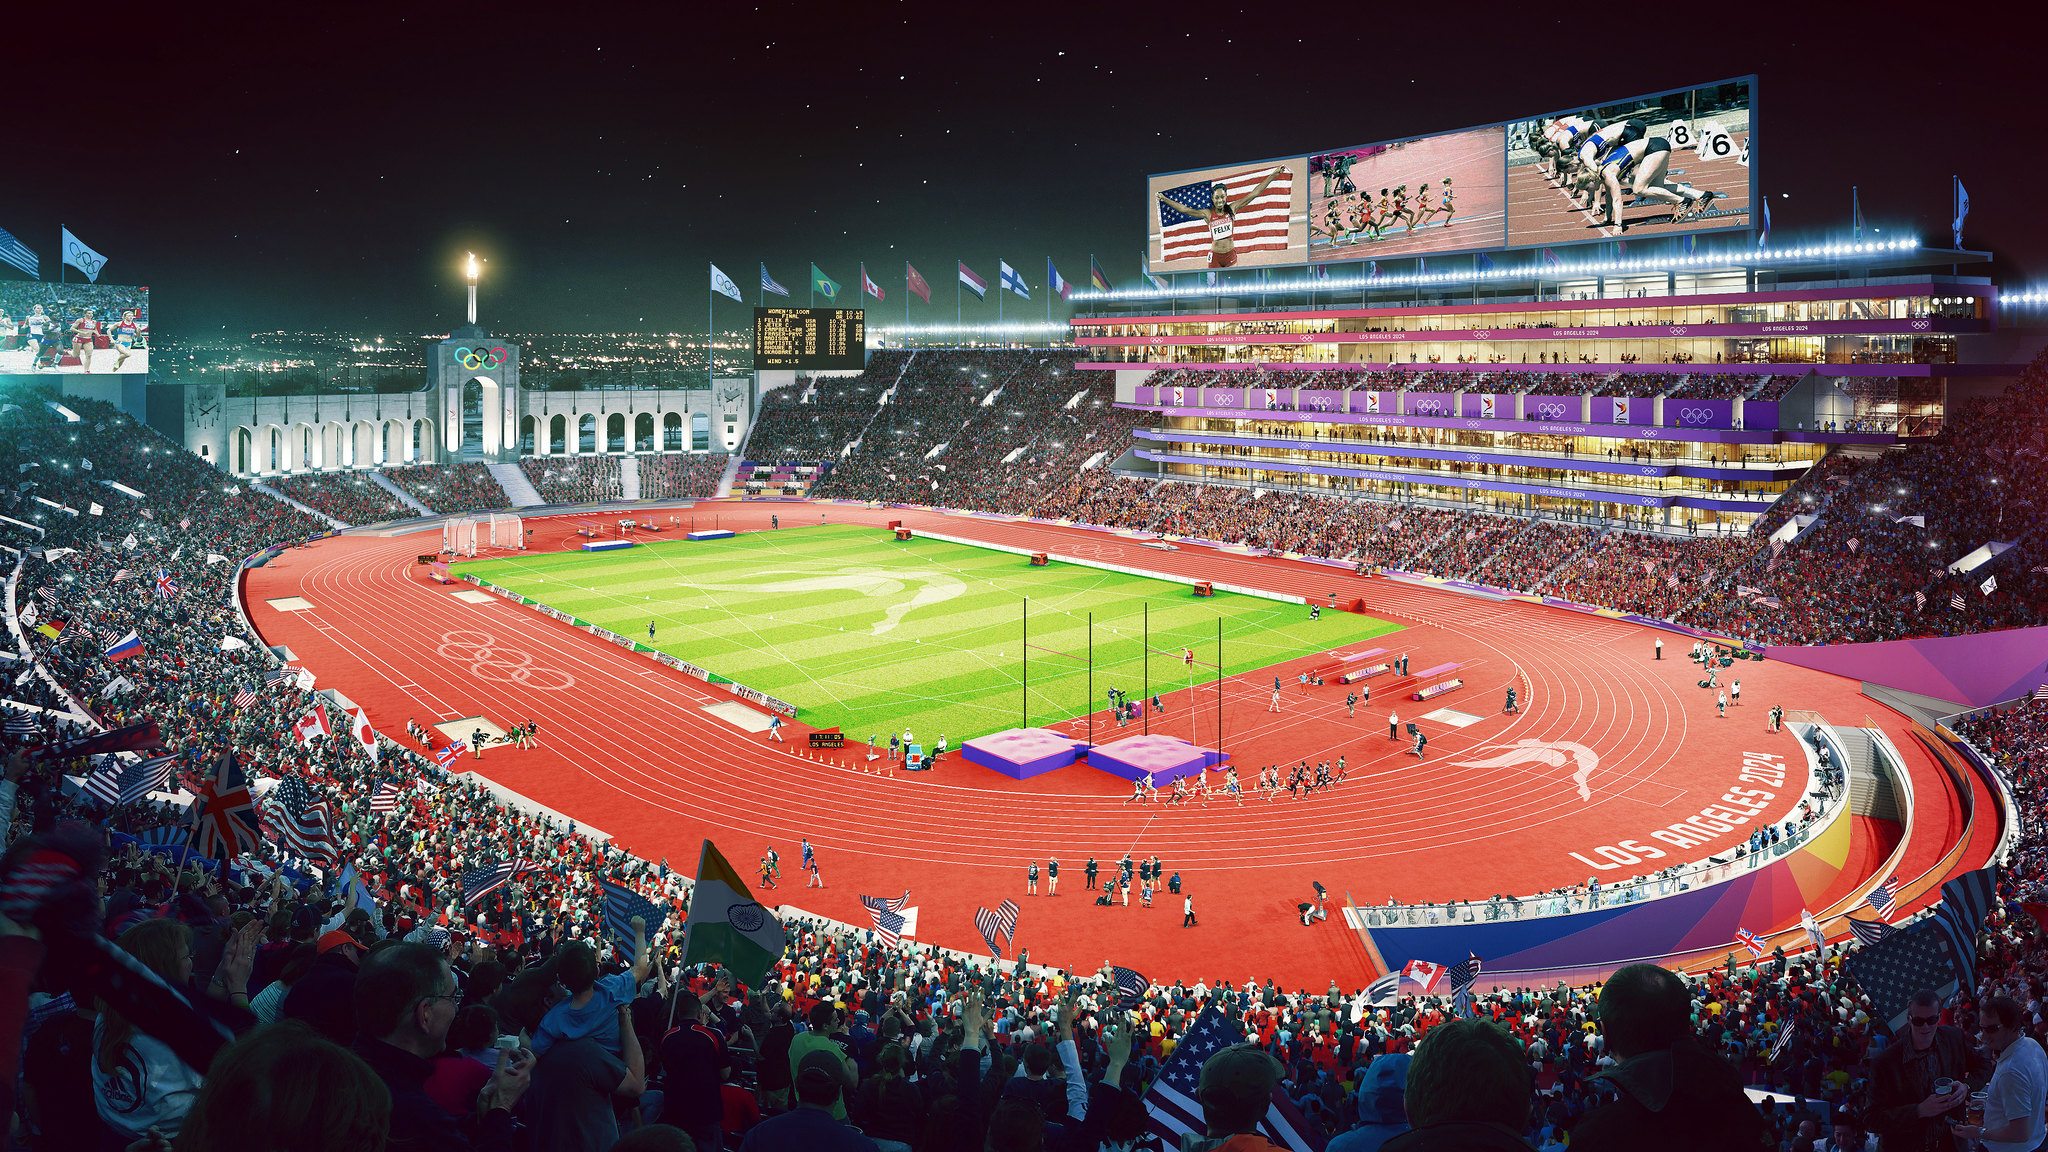 A Glimpse at What the Olympic Games Could Look Like in Los Angeles